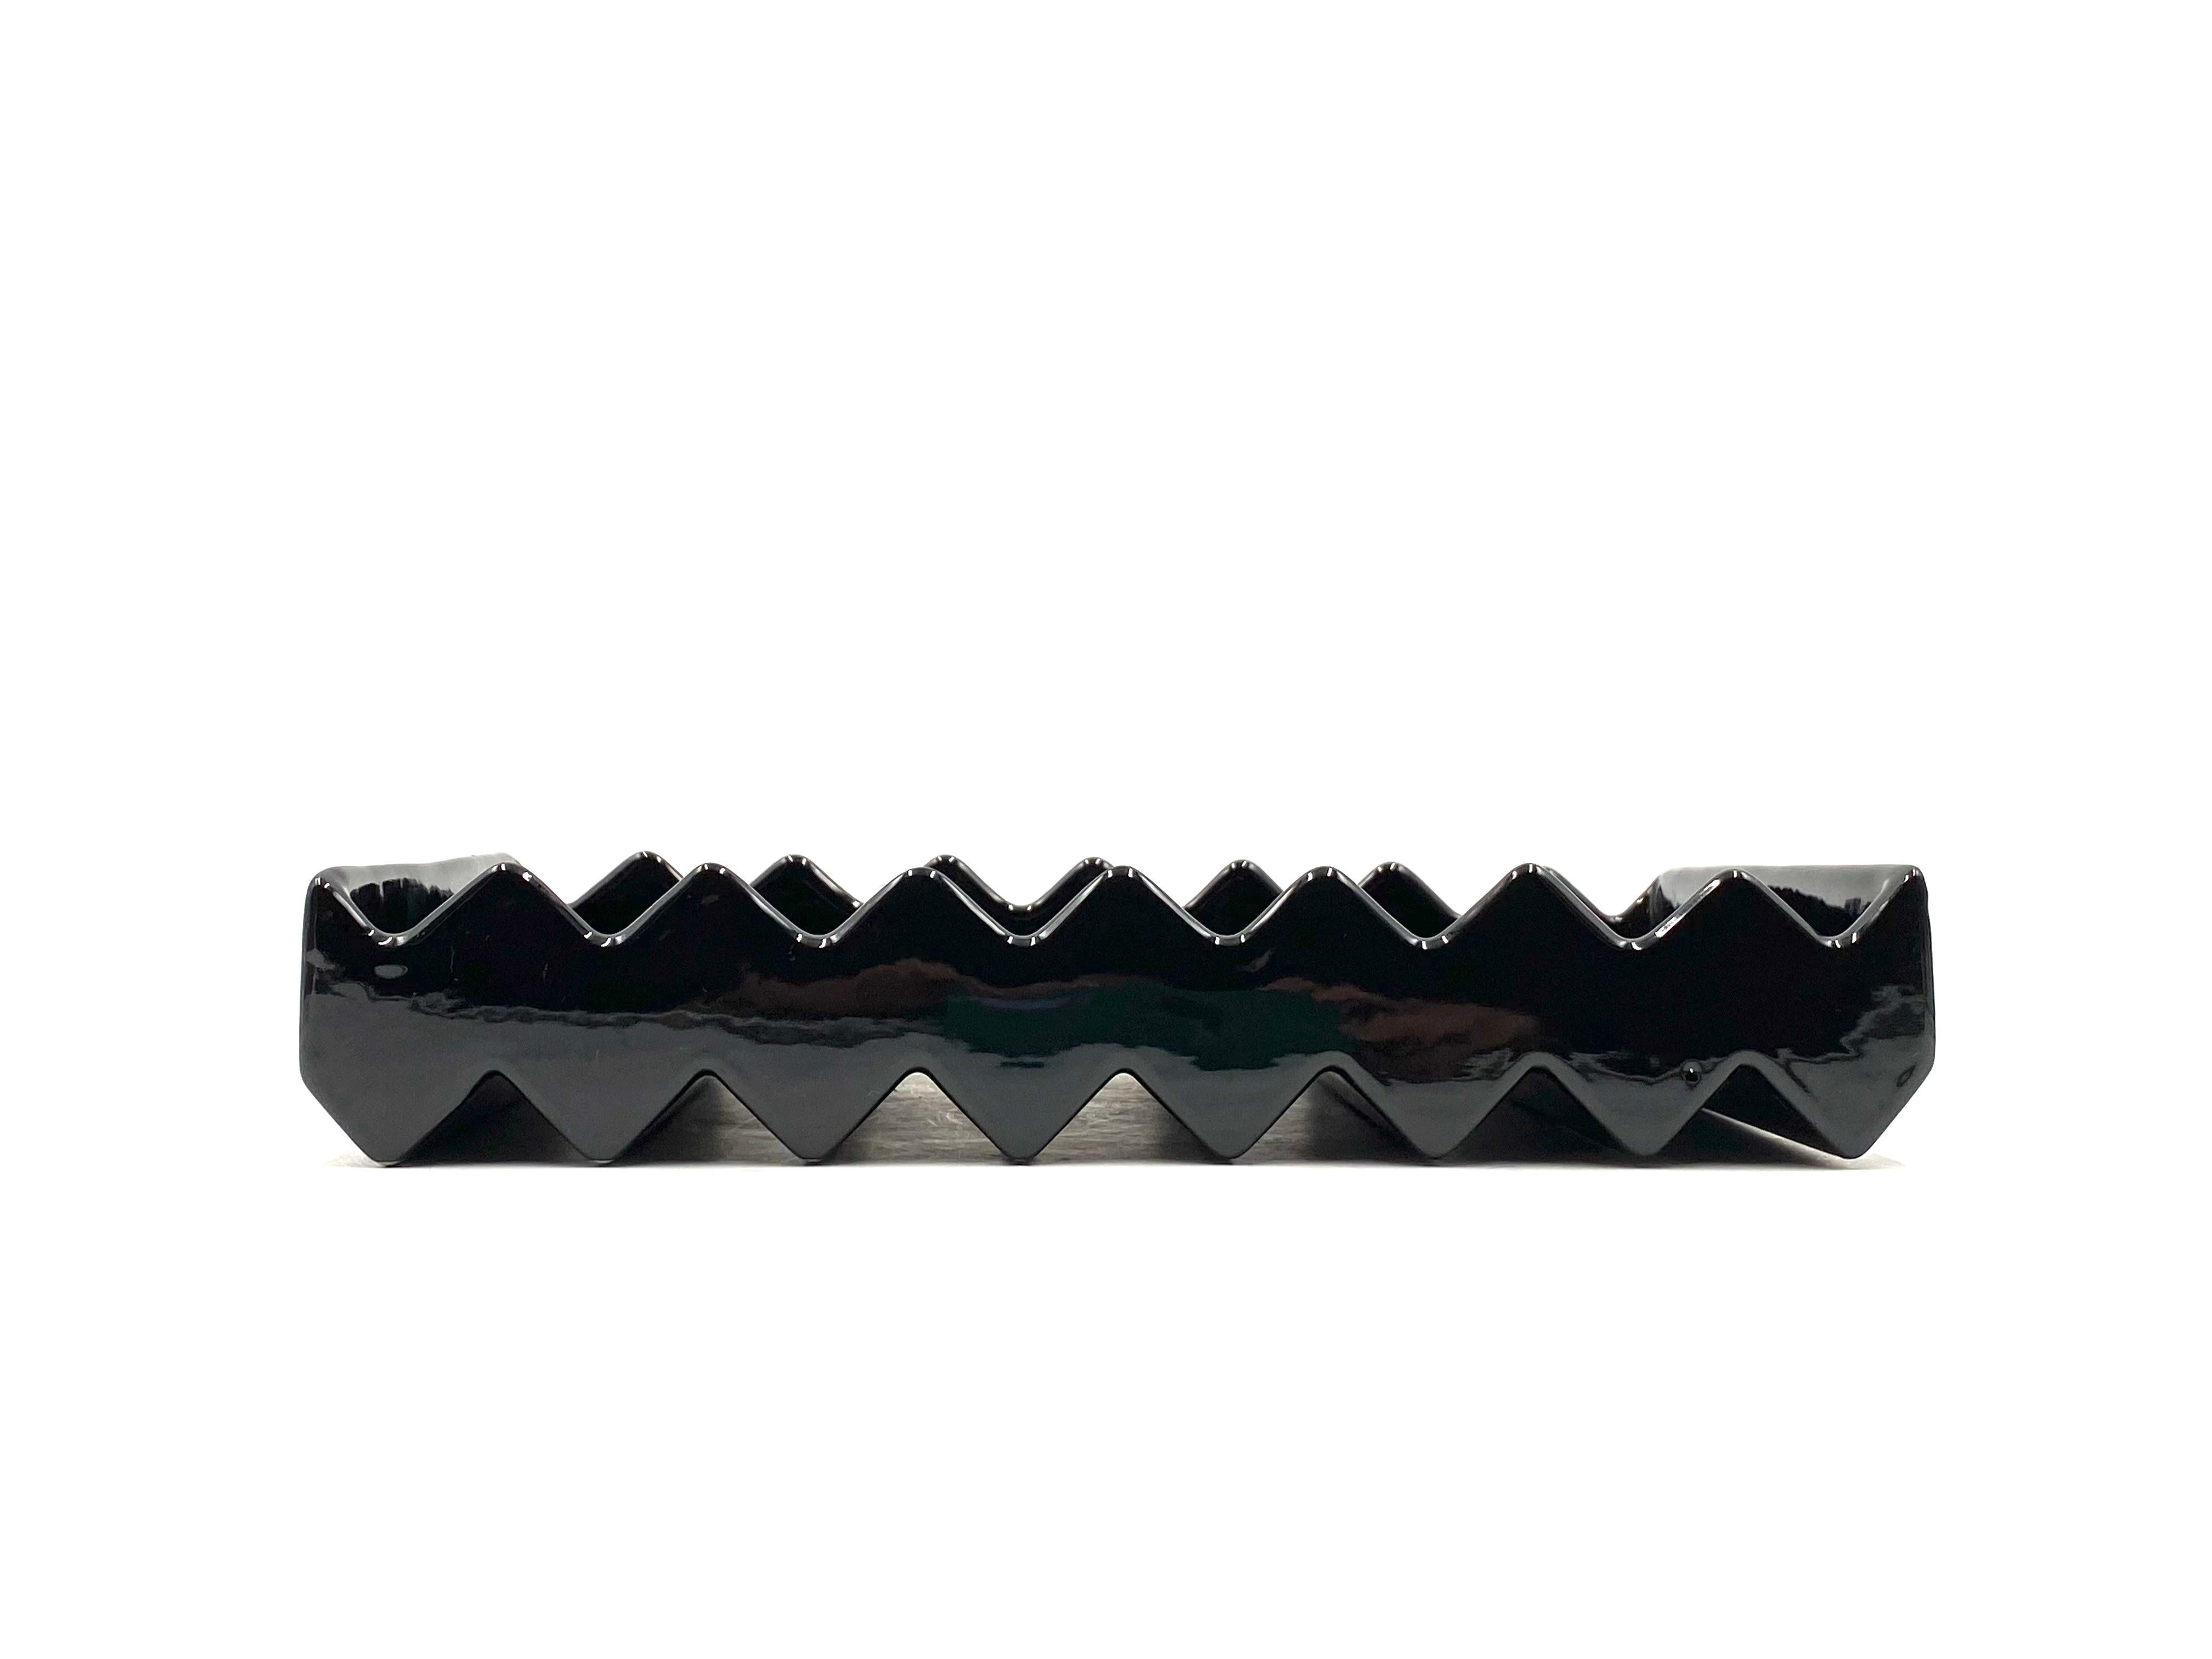 Ceramic Ettore Sottsass, Vide-Poche / Tray Mod. Y24 from the Yantra Series, Italy, 1969 For Sale